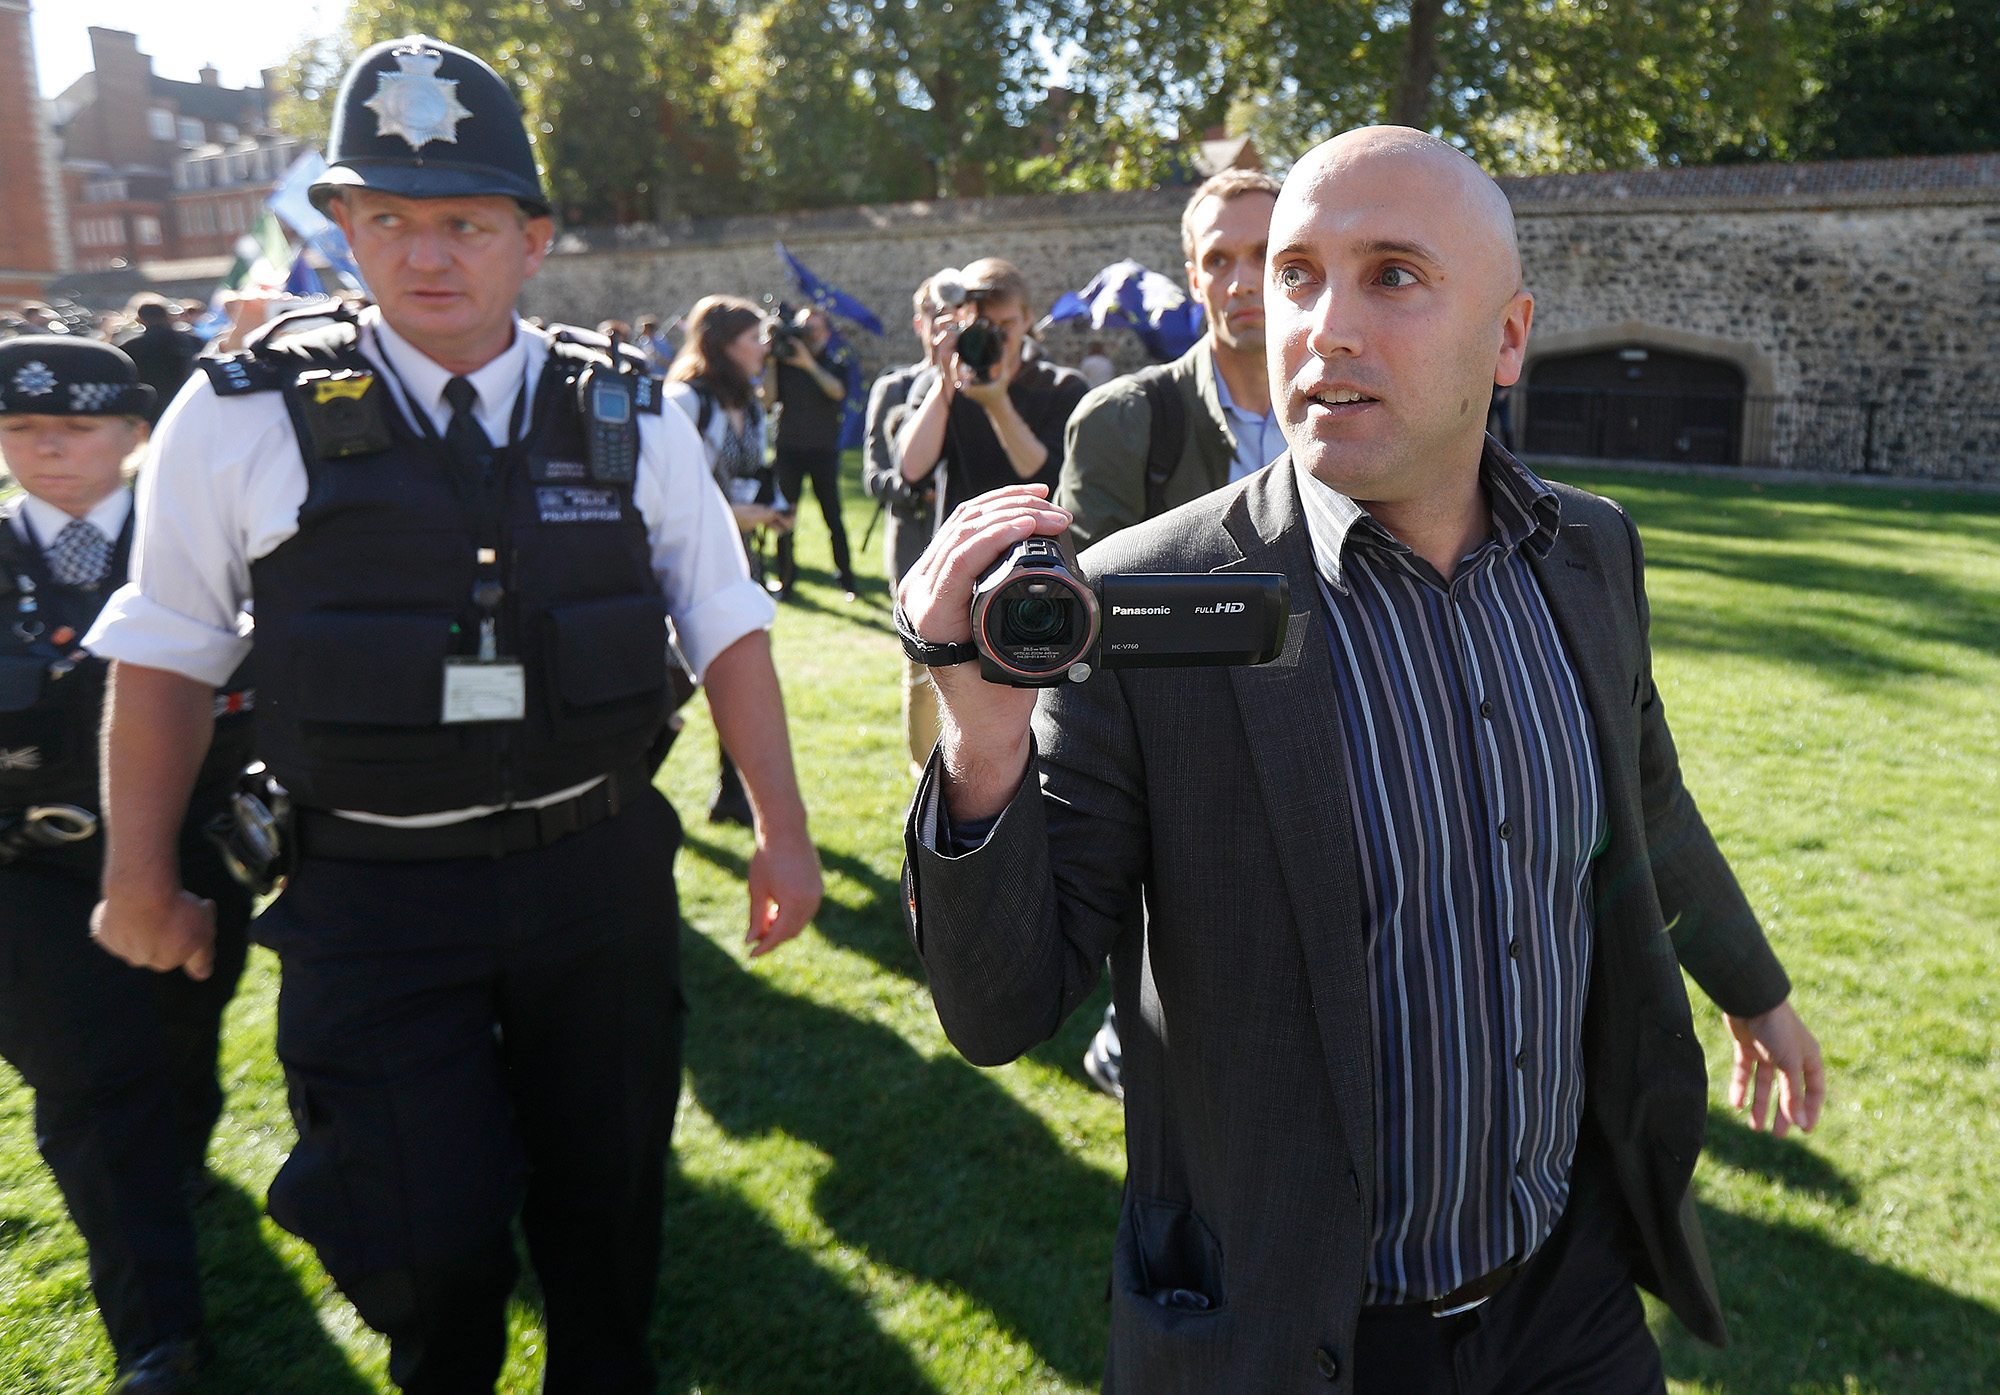 Blogger Graham Phillips is escorted away by police officers after he disrupted a press conference in London on October 9, 2018.